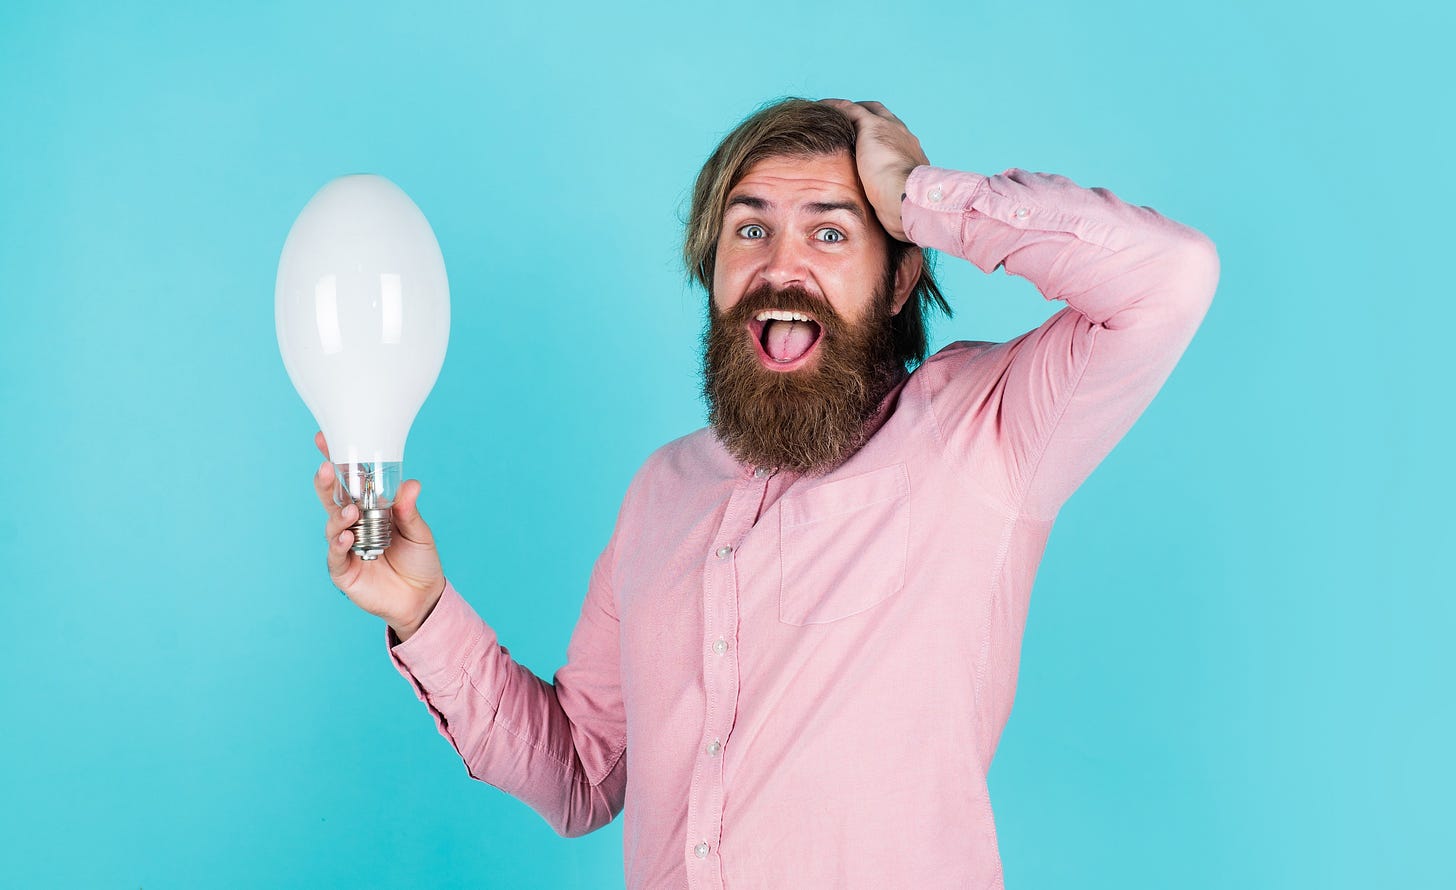 man with surprised expression holding a lightbulb